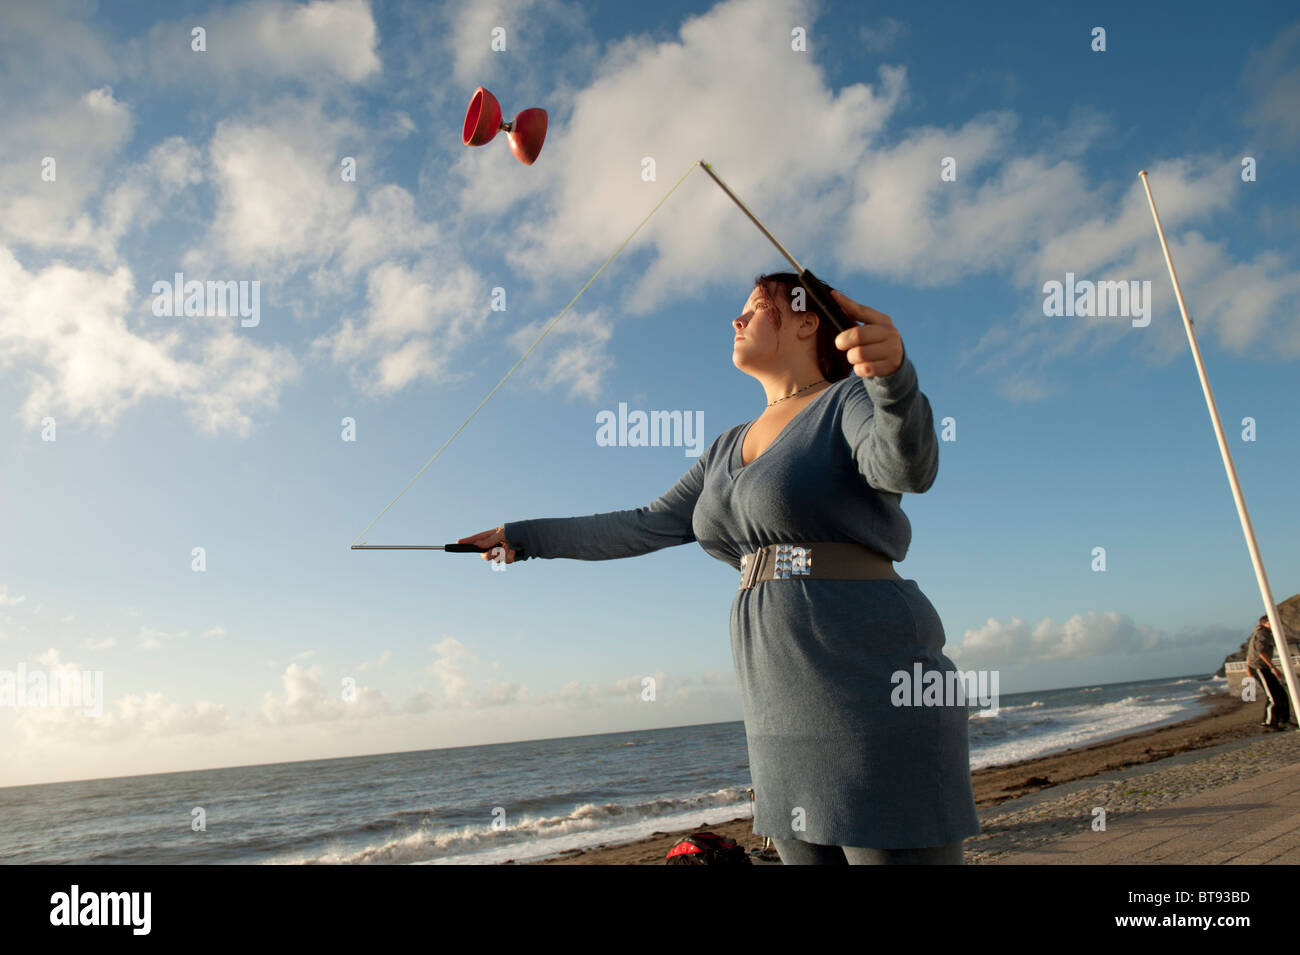 A young woman learning to use the diablo, Aberystwyth seafront Wales UK Stock Photo